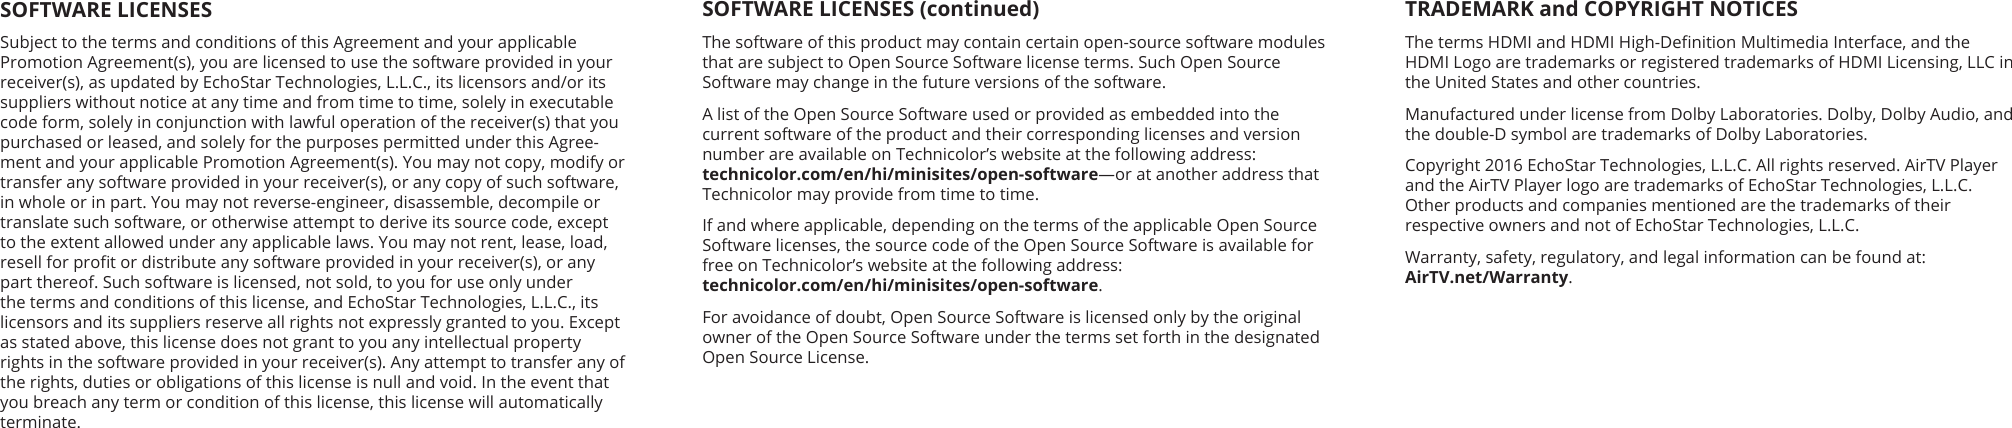 SOFTWARE LICENSES (continued)The software of this product may contain certain open-source software modules that are subject to Open Source Software license terms. Such Open Source  Software may change in the future versions of the software. A list of the Open Source Software used or provided as embedded into the current software of the product and their corresponding licenses and version number are available on Technicolor’s website at the following address:  technicolor.com/en/hi/minisites/open-software—or at another address that Technicolor may provide from time to time.If and where applicable, depending on the terms of the applicable Open Source Software licenses, the source code of the Open Source Software is available for free on Technicolor’s website at the following address:  technicolor.com/en/hi/minisites/open-software. For avoidance of doubt, Open Source Software is licensed only by the original owner of the Open Source Software under the terms set forth in the designated Open Source License.SOFTWARE LICENSESSubject to the terms and conditions of this Agreement and your applicable Promotion Agreement(s), you are licensed to use the software provided in your receiver(s), as updated by EchoStar Technologies, L.L.C., its licensors and/or its suppliers without notice at any time and from time to time, solely in executable code form, solely in conjunction with lawful operation of the receiver(s) that you purchased or leased, and solely for the purposes permitted under this Agree-ment and your applicable Promotion Agreement(s). You may not copy, modify or transfer any software provided in your receiver(s), or any copy of such software, in whole or in part. You may not reverse-engineer, disassemble, decompile or translate such software, or otherwise attempt to derive its source code, except to the extent allowed under any applicable laws. You may not rent, lease, load, resell for prot or distribute any software provided in your receiver(s), or any part thereof. Such software is licensed, not sold, to you for use only under the terms and conditions of this license, and EchoStar Technologies, L.L.C., its licensors and its suppliers reserve all rights not expressly granted to you. Except as stated above, this license does not grant to you any intellectual property rights in the software provided in your receiver(s). Any attempt to transfer any of the rights, duties or obligations of this license is null and void. In the event that you breach any term or condition of this license, this license will automatically terminate.TRADEMARK and COPYRIGHT NOTICESThe terms HDMI and HDMI High-Denition Multimedia Interface, and the  HDMI Logo are trademarks or registered trademarks of HDMI Licensing, LLC in the United States and other countries.Manufactured under license from Dolby Laboratories. Dolby, Dolby Audio, and the double-D symbol are trademarks of Dolby Laboratories.Copyright 2016 EchoStar Technologies, L.L.C. All rights reserved. AirTV Player  and the AirTV Player logo are trademarks of EchoStar Technologies, L.L.C.  Other products and companies mentioned are the trademarks of their respective owners and not of EchoStar Technologies, L.L.C.Warranty, safety, regulatory, and legal information can be found at: AirTV.net/Warranty.